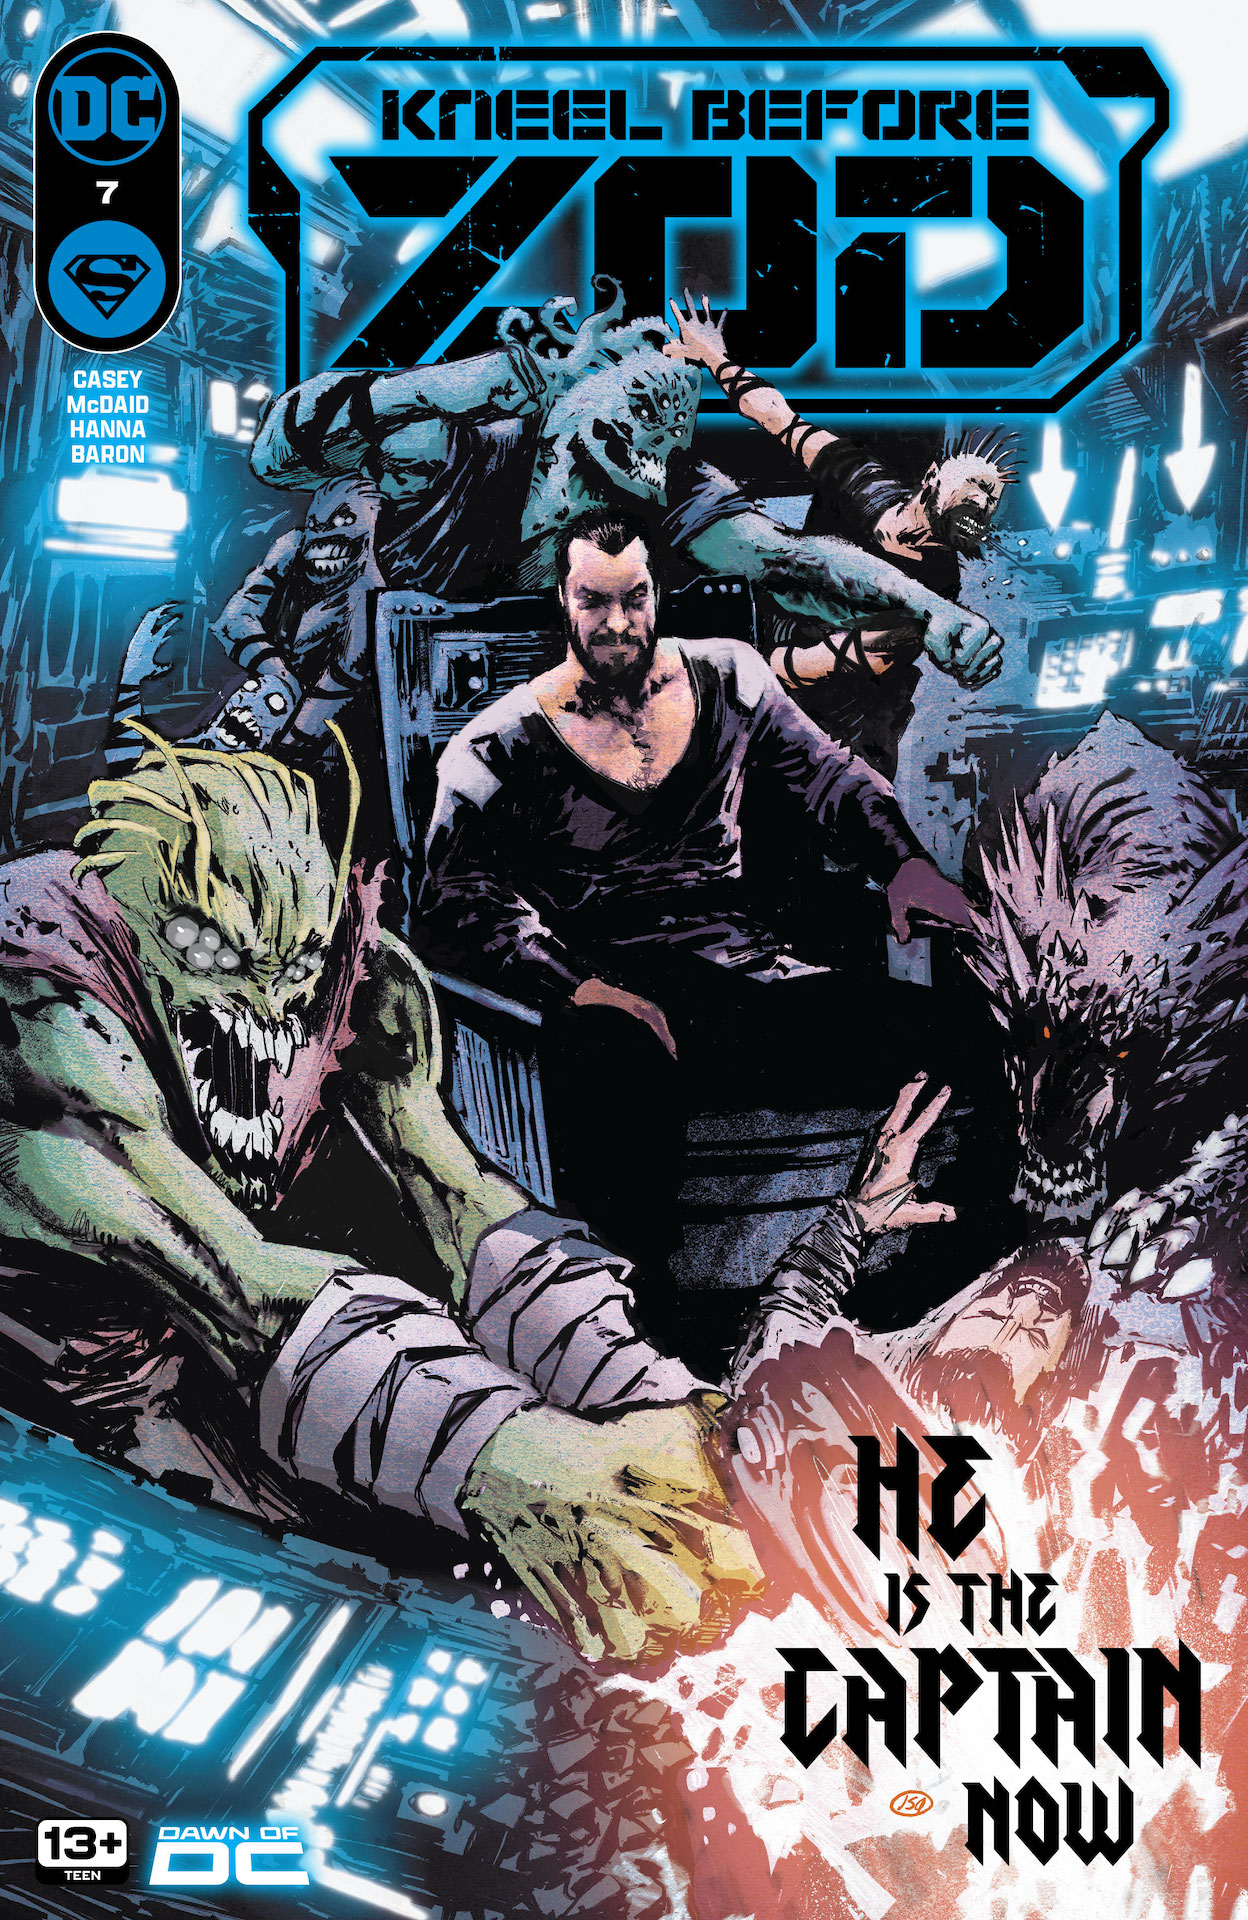 DC Preview: Kneel Before Zod #7